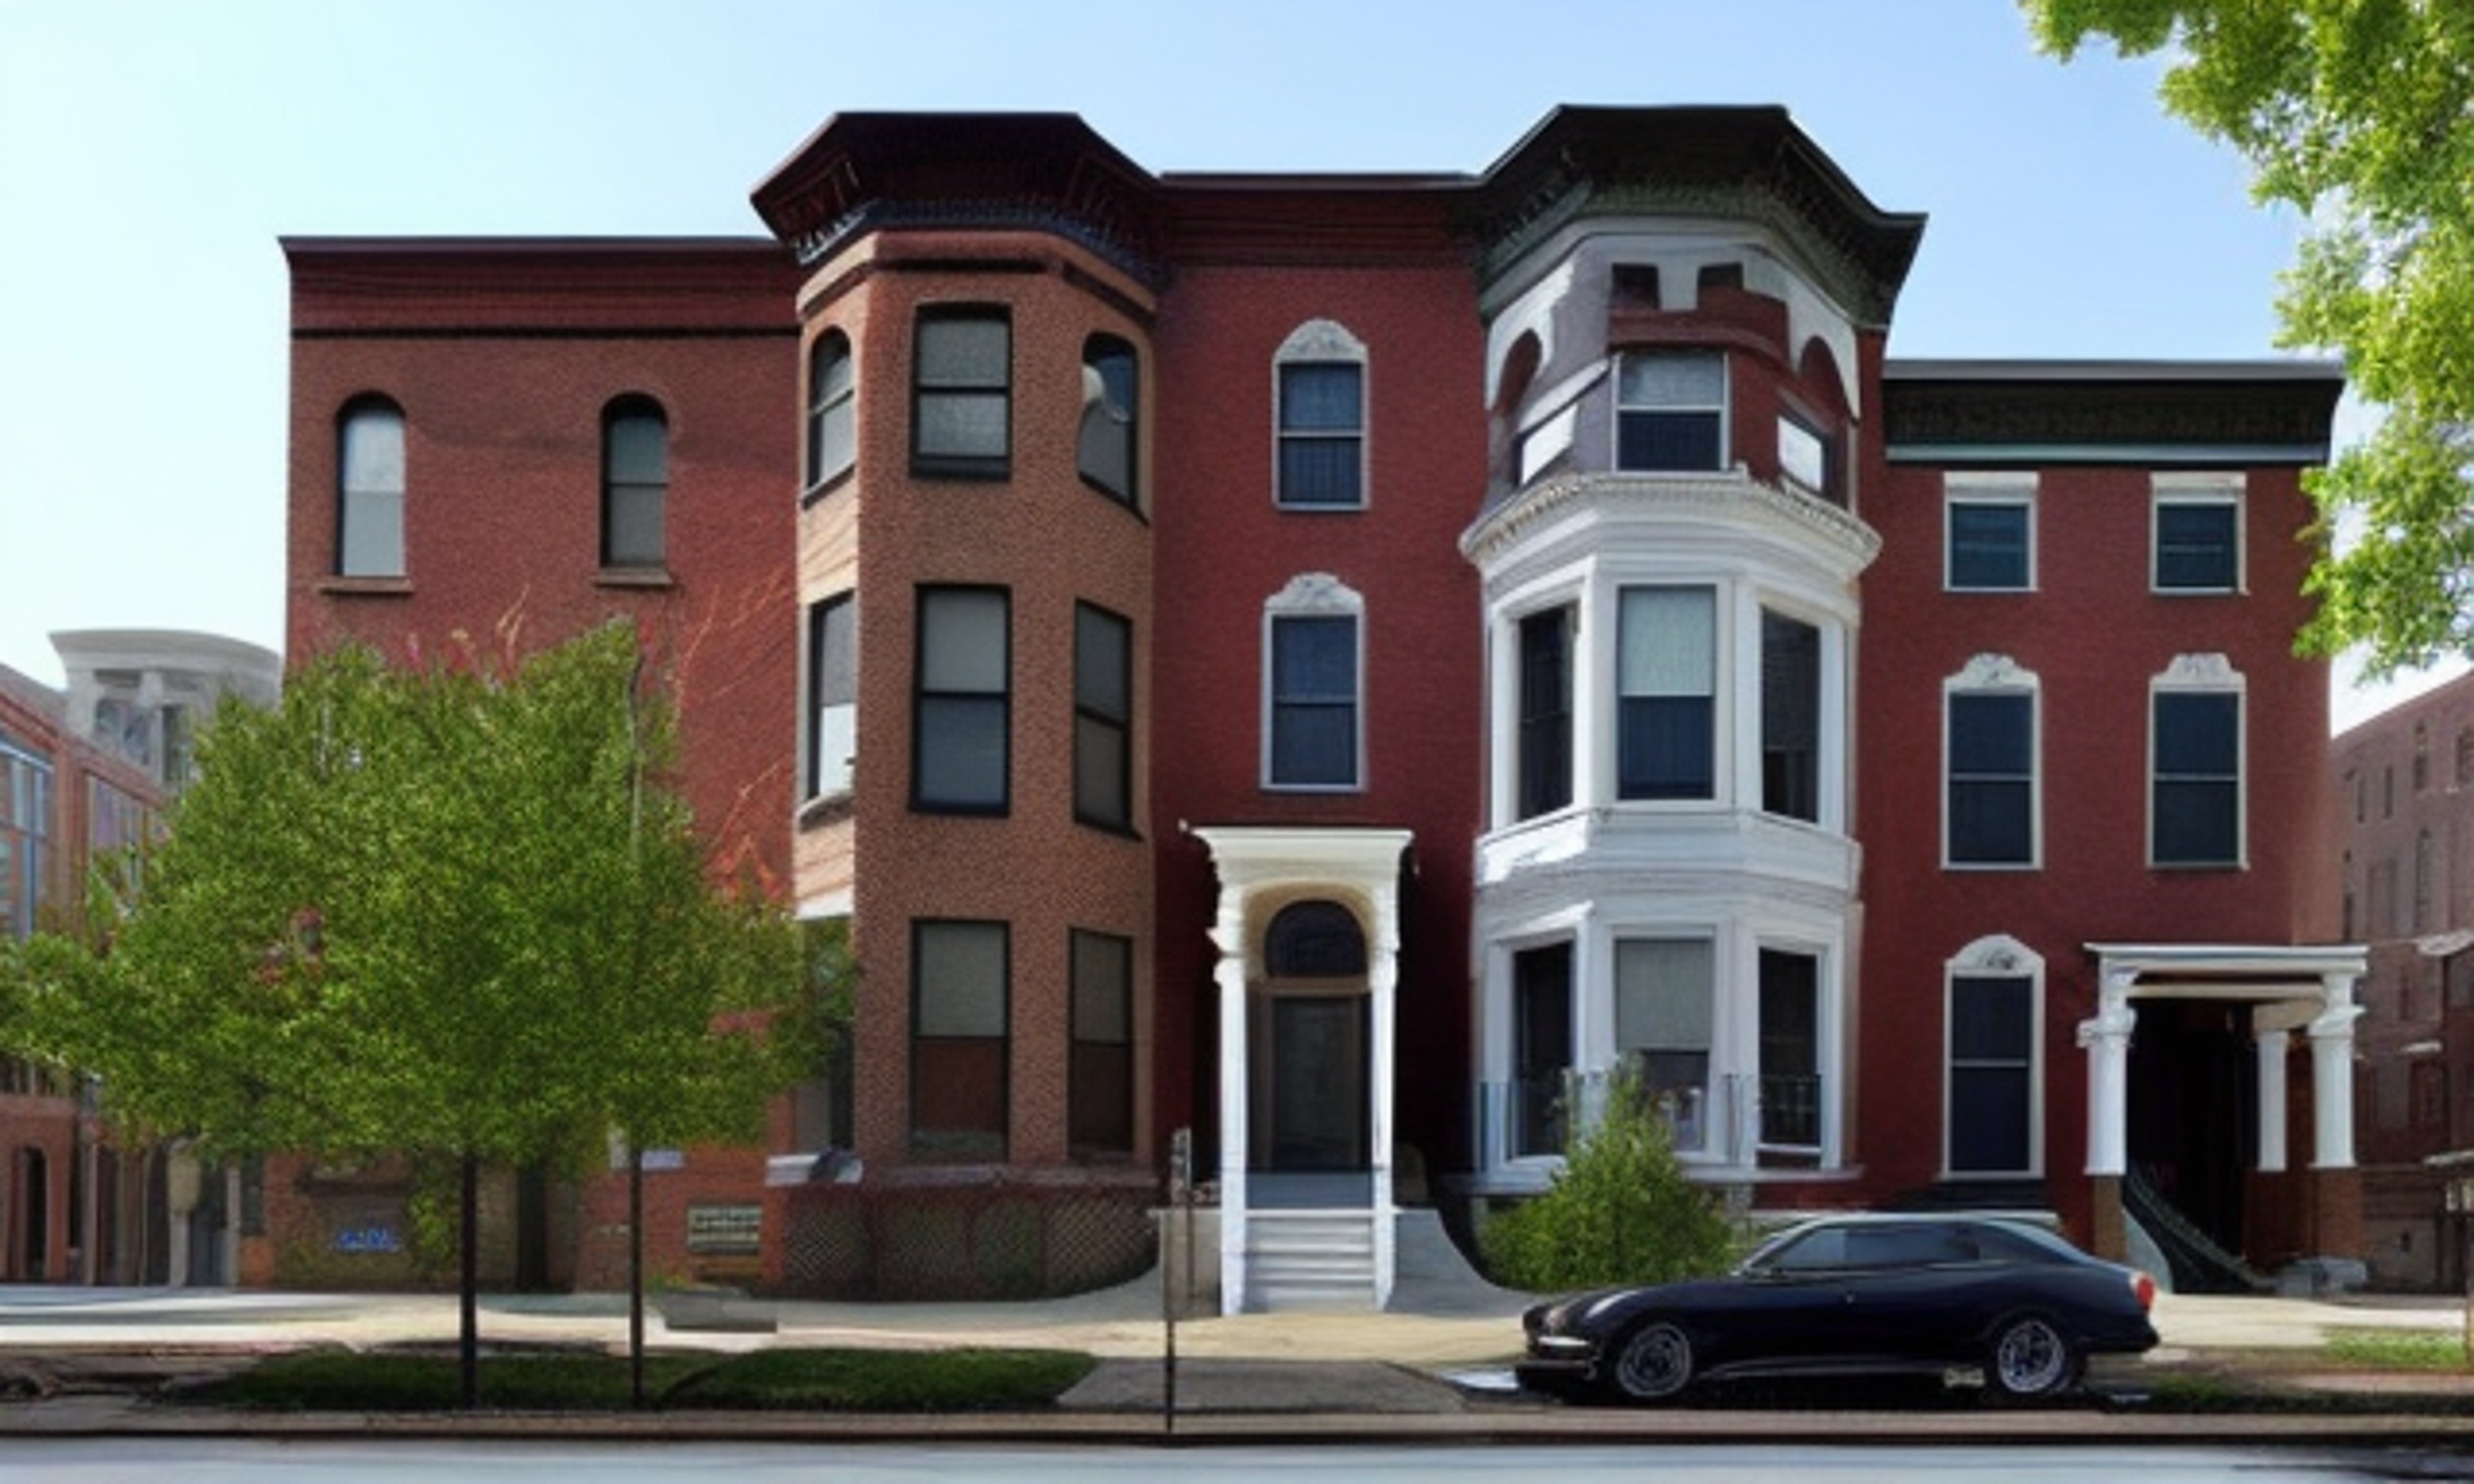 Five Super Block Buildings in Baltimore Can't Be Demolished, City Panel Says